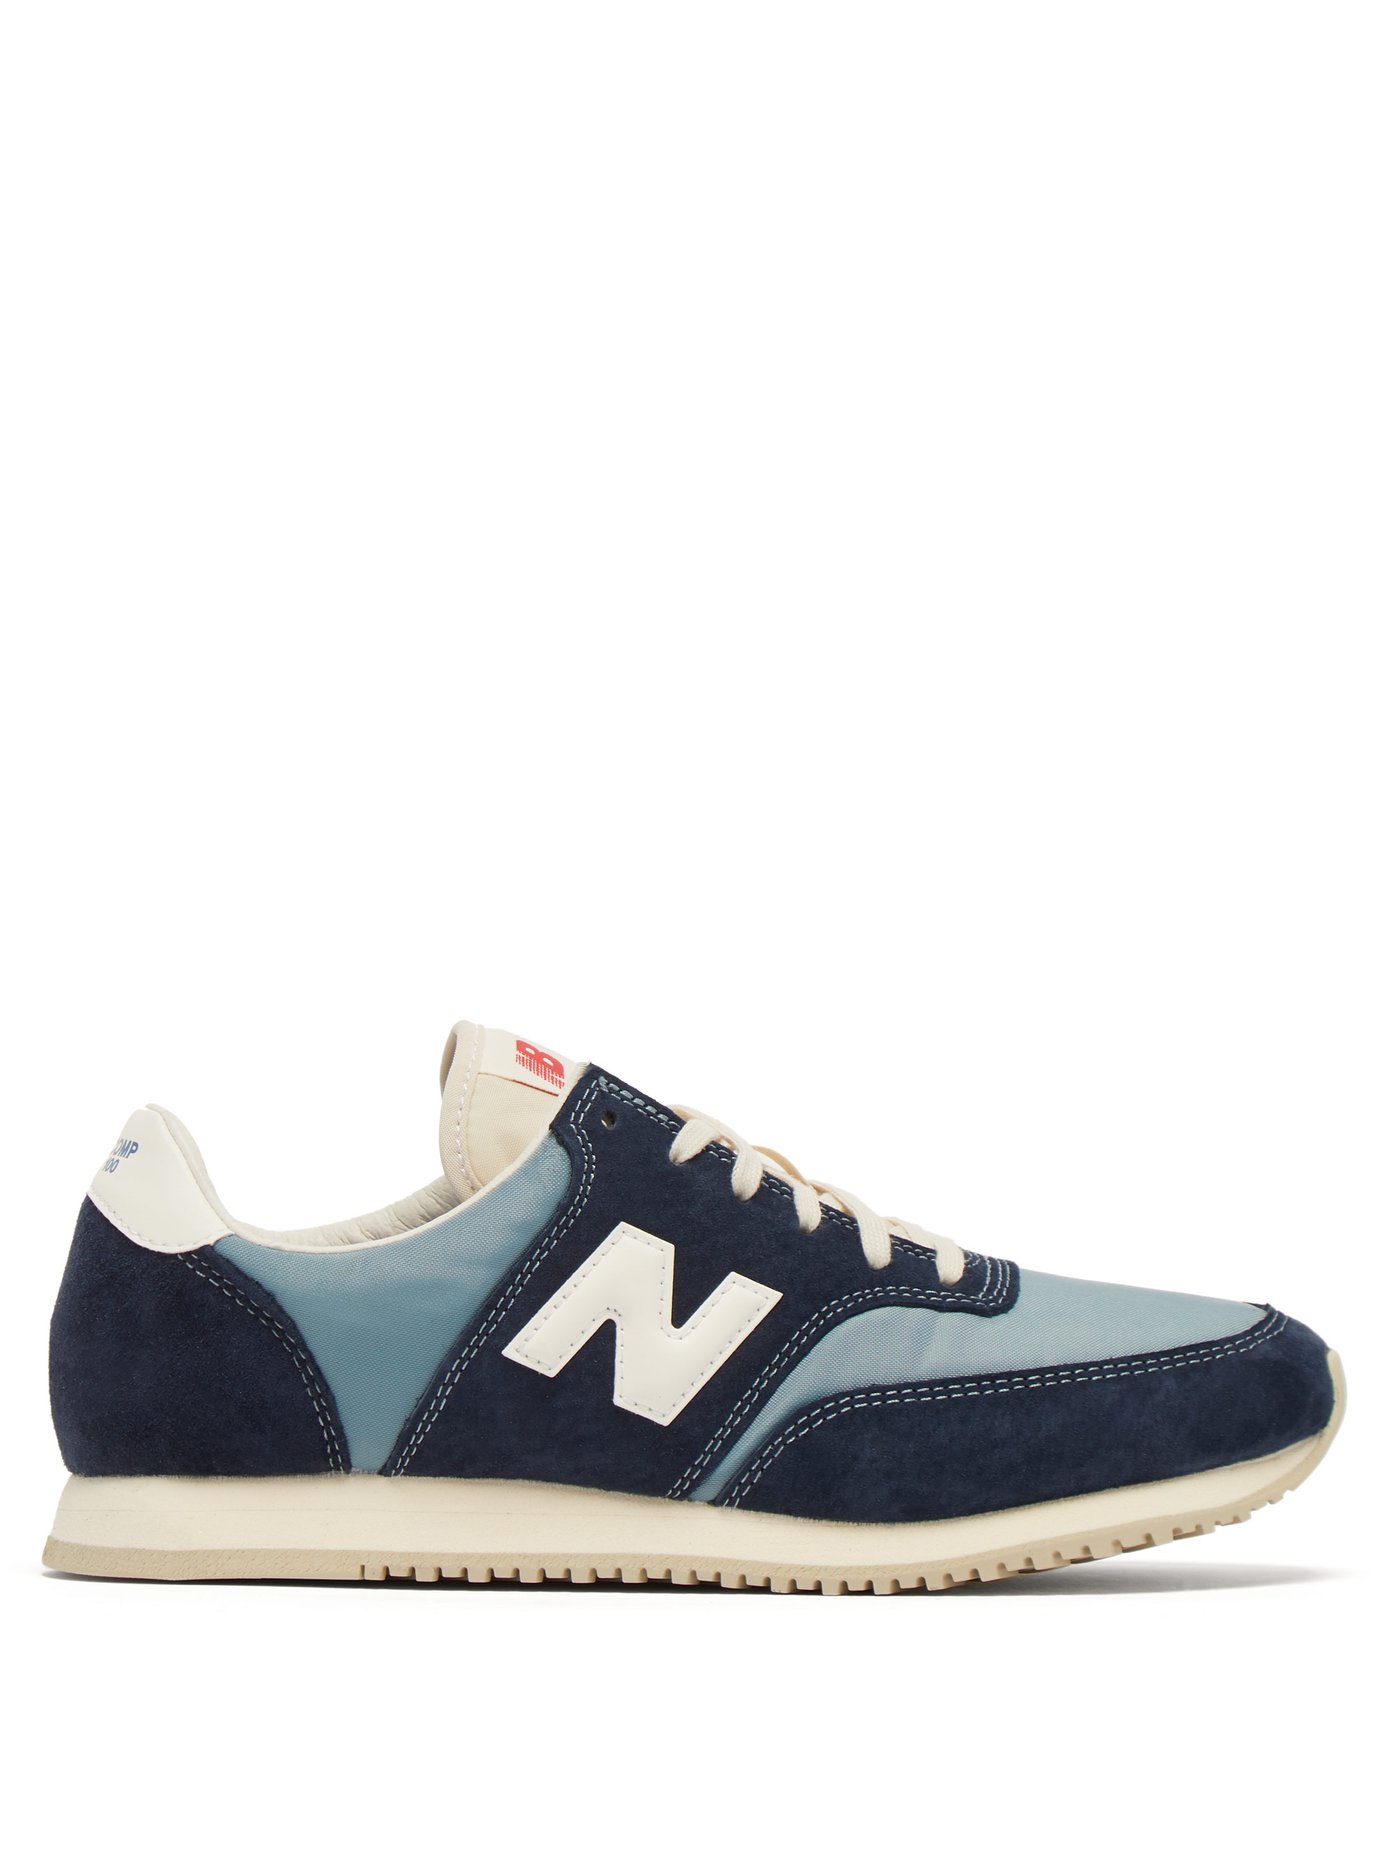 Comp 100 suede and nylon trainers | New Balance | MATCHESFASHION JP